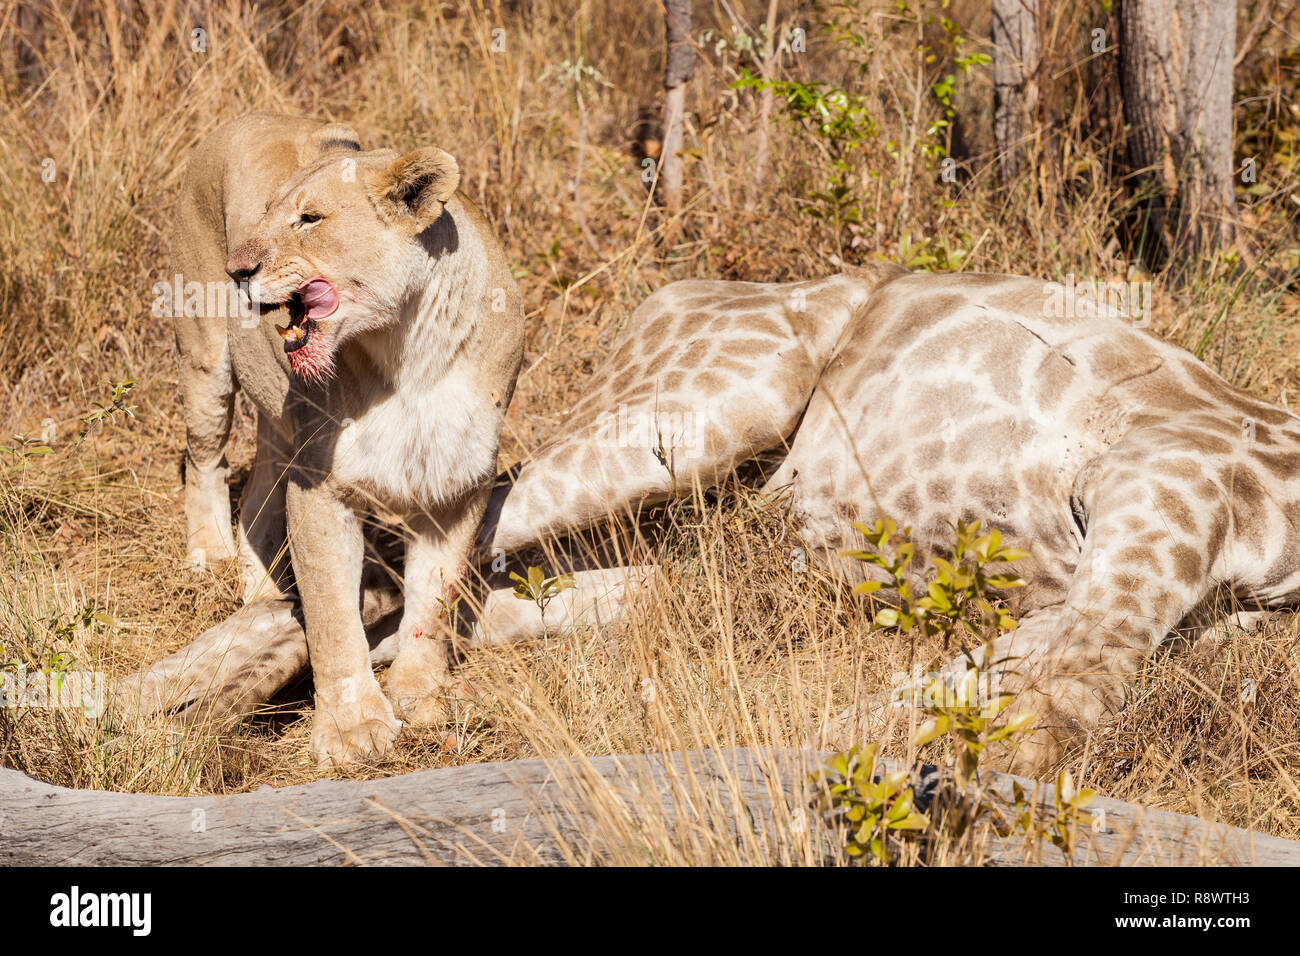 African Lion eating a Giraffe on safari in a South African game reserve Stock Photo